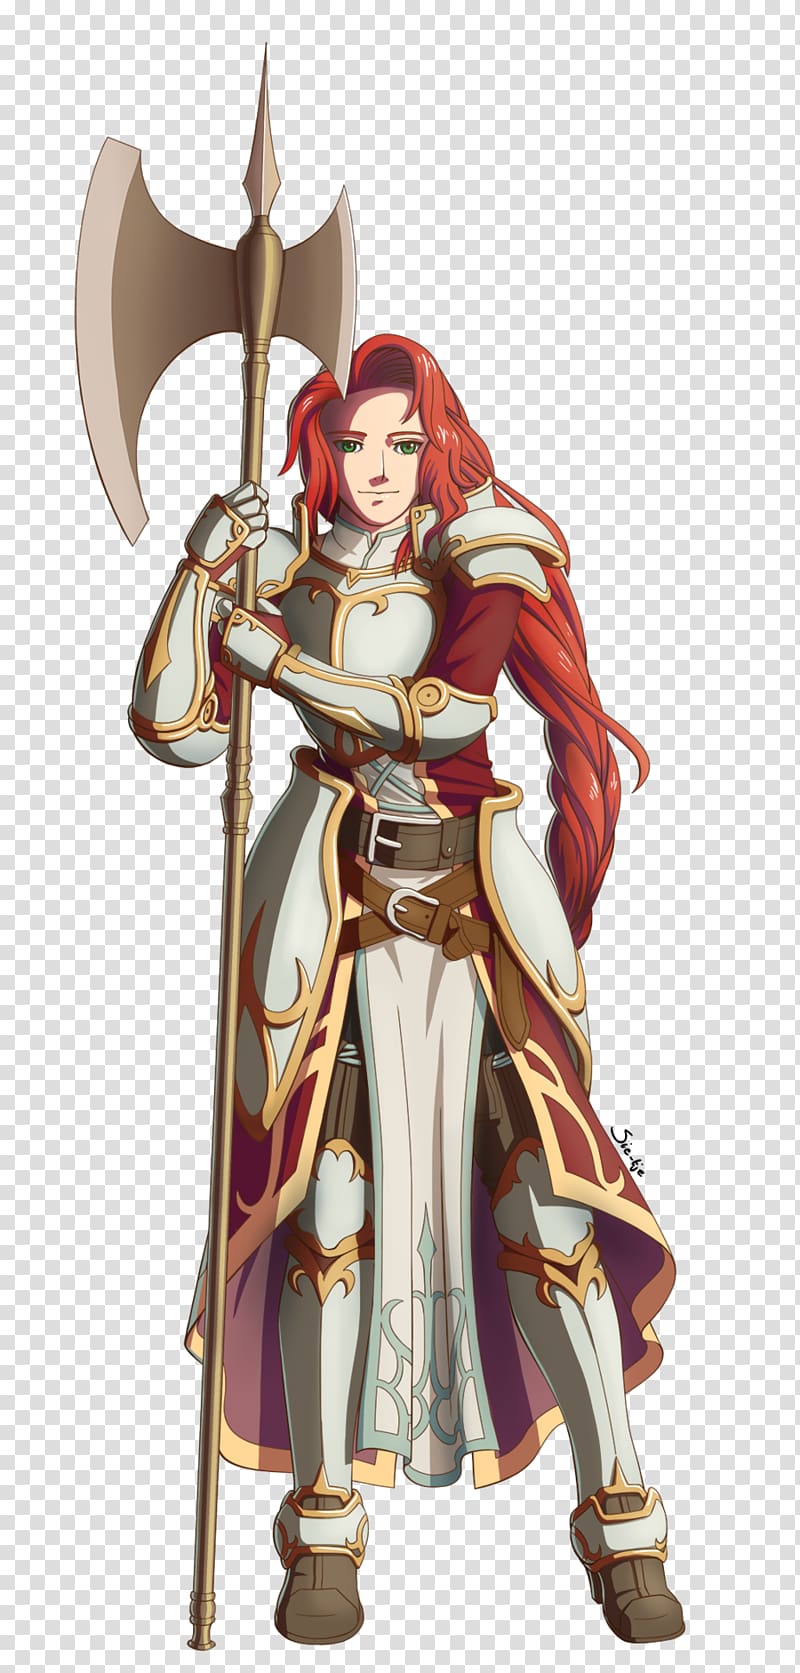 Fire Emblem: Path of Radiance Tokyo Mirage Sessions ♯FE Fire Emblem Echoes: Shadows of Valentia Titania Fan art, others transparent background PNG clipart